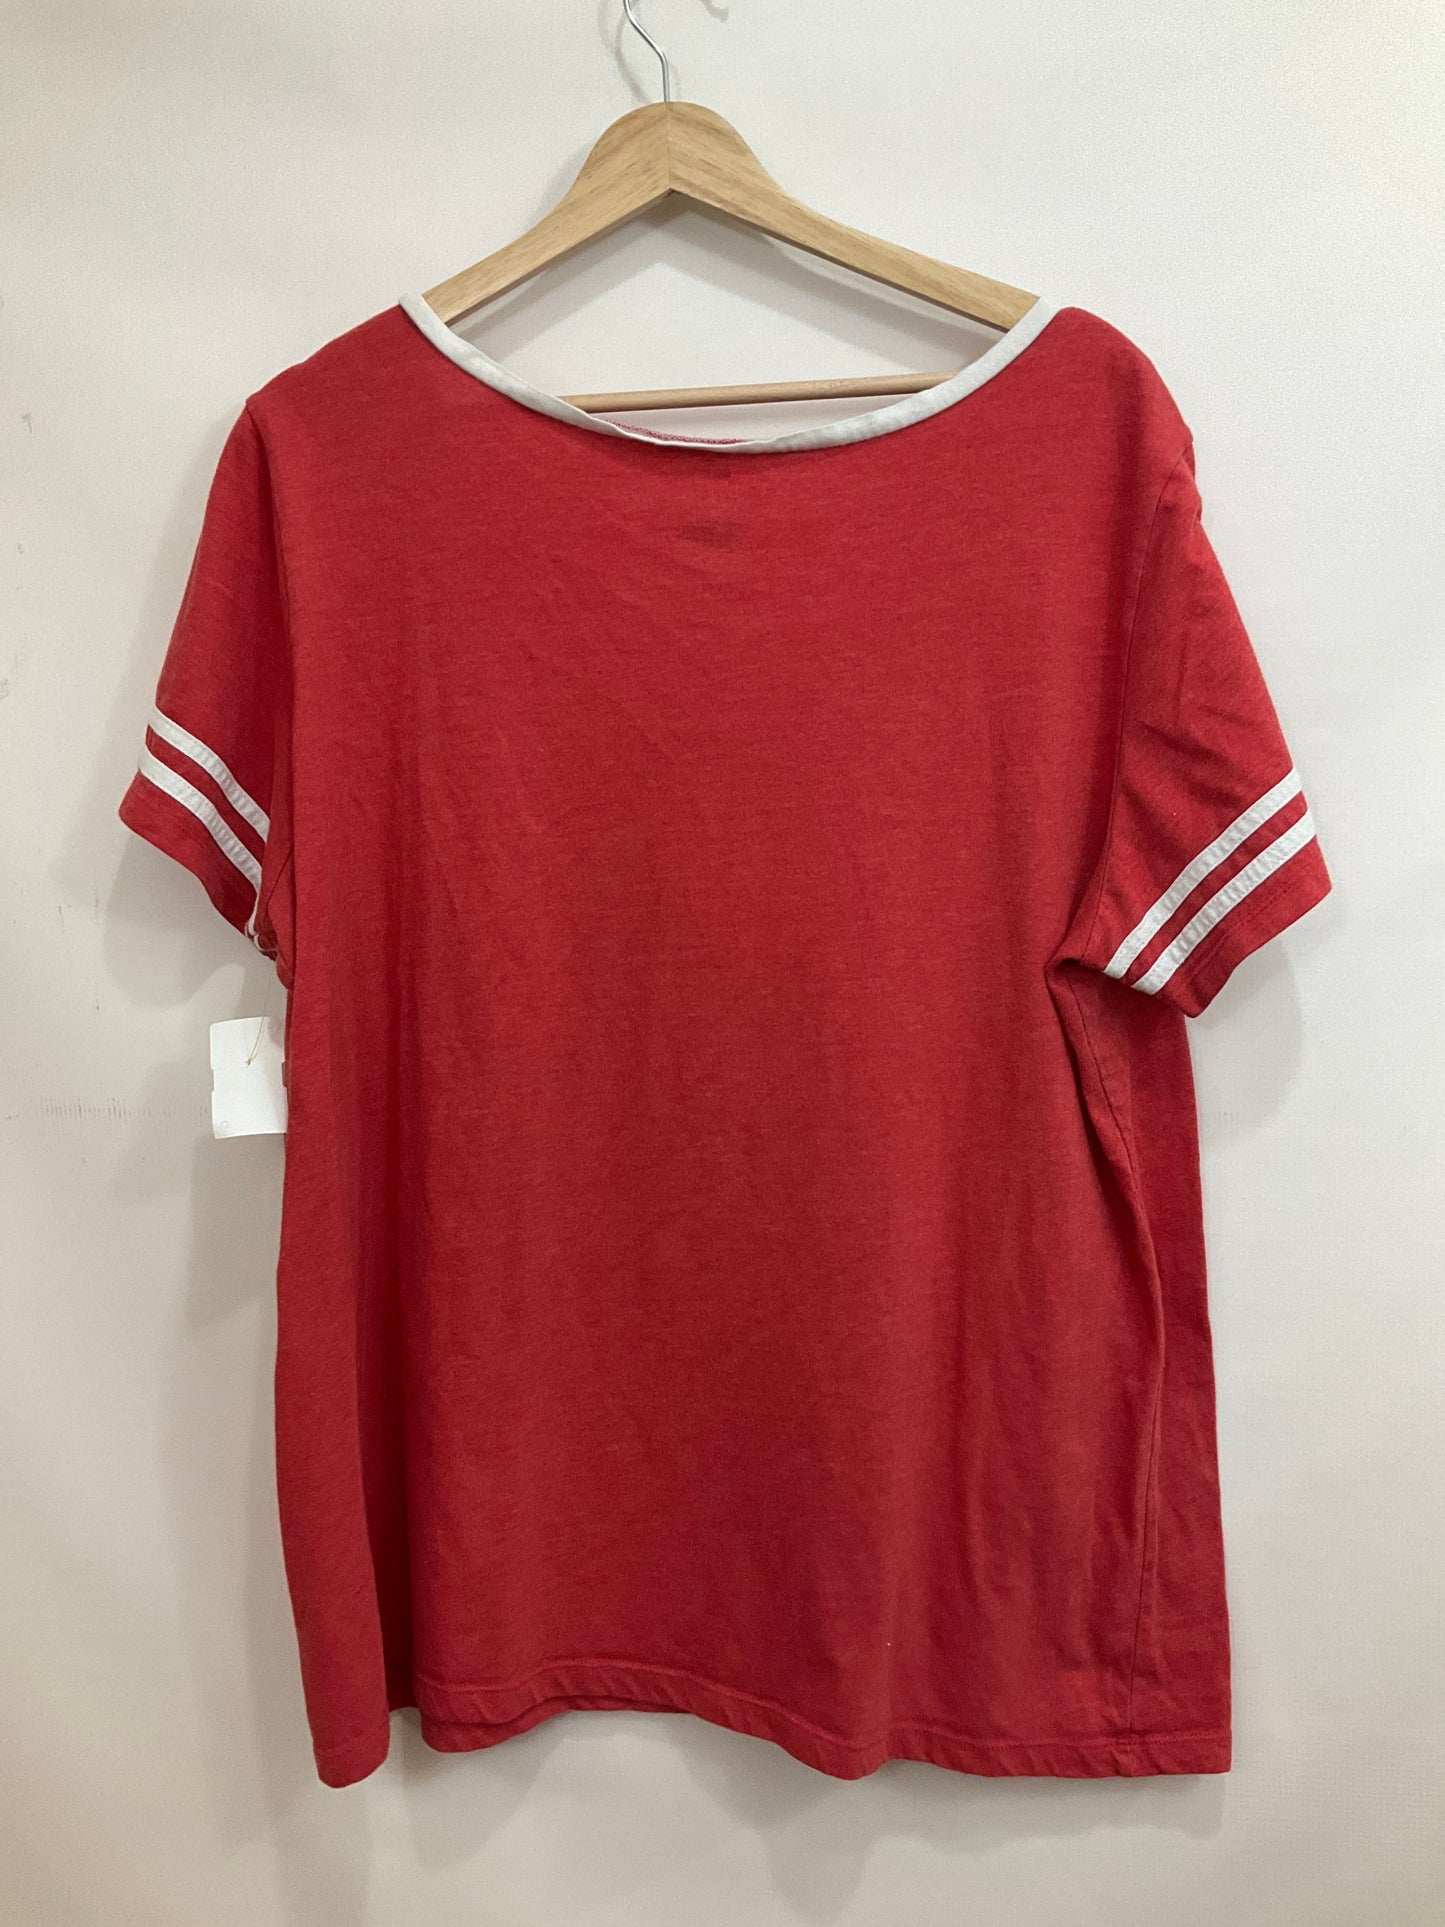 Athletic Top Short Sleeve By Clothes Mentor  Size: 2x